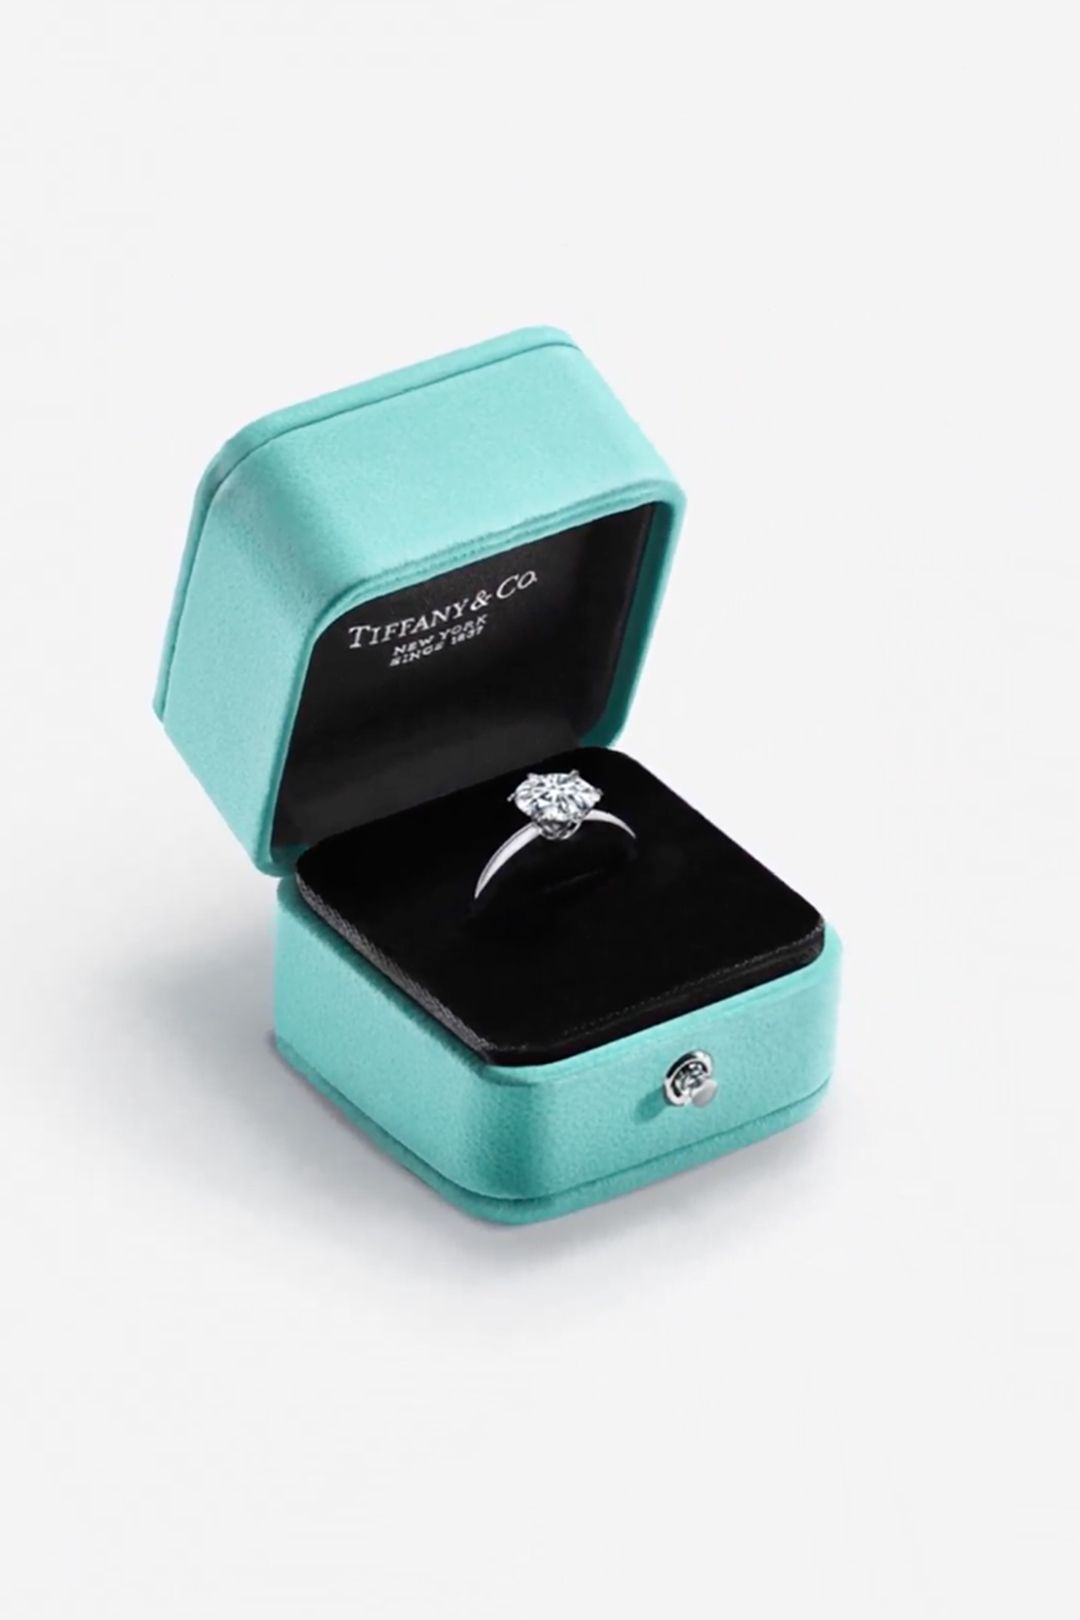 Introducing Tiffany’s Diamond Source Initiative: a significant step for diamon...